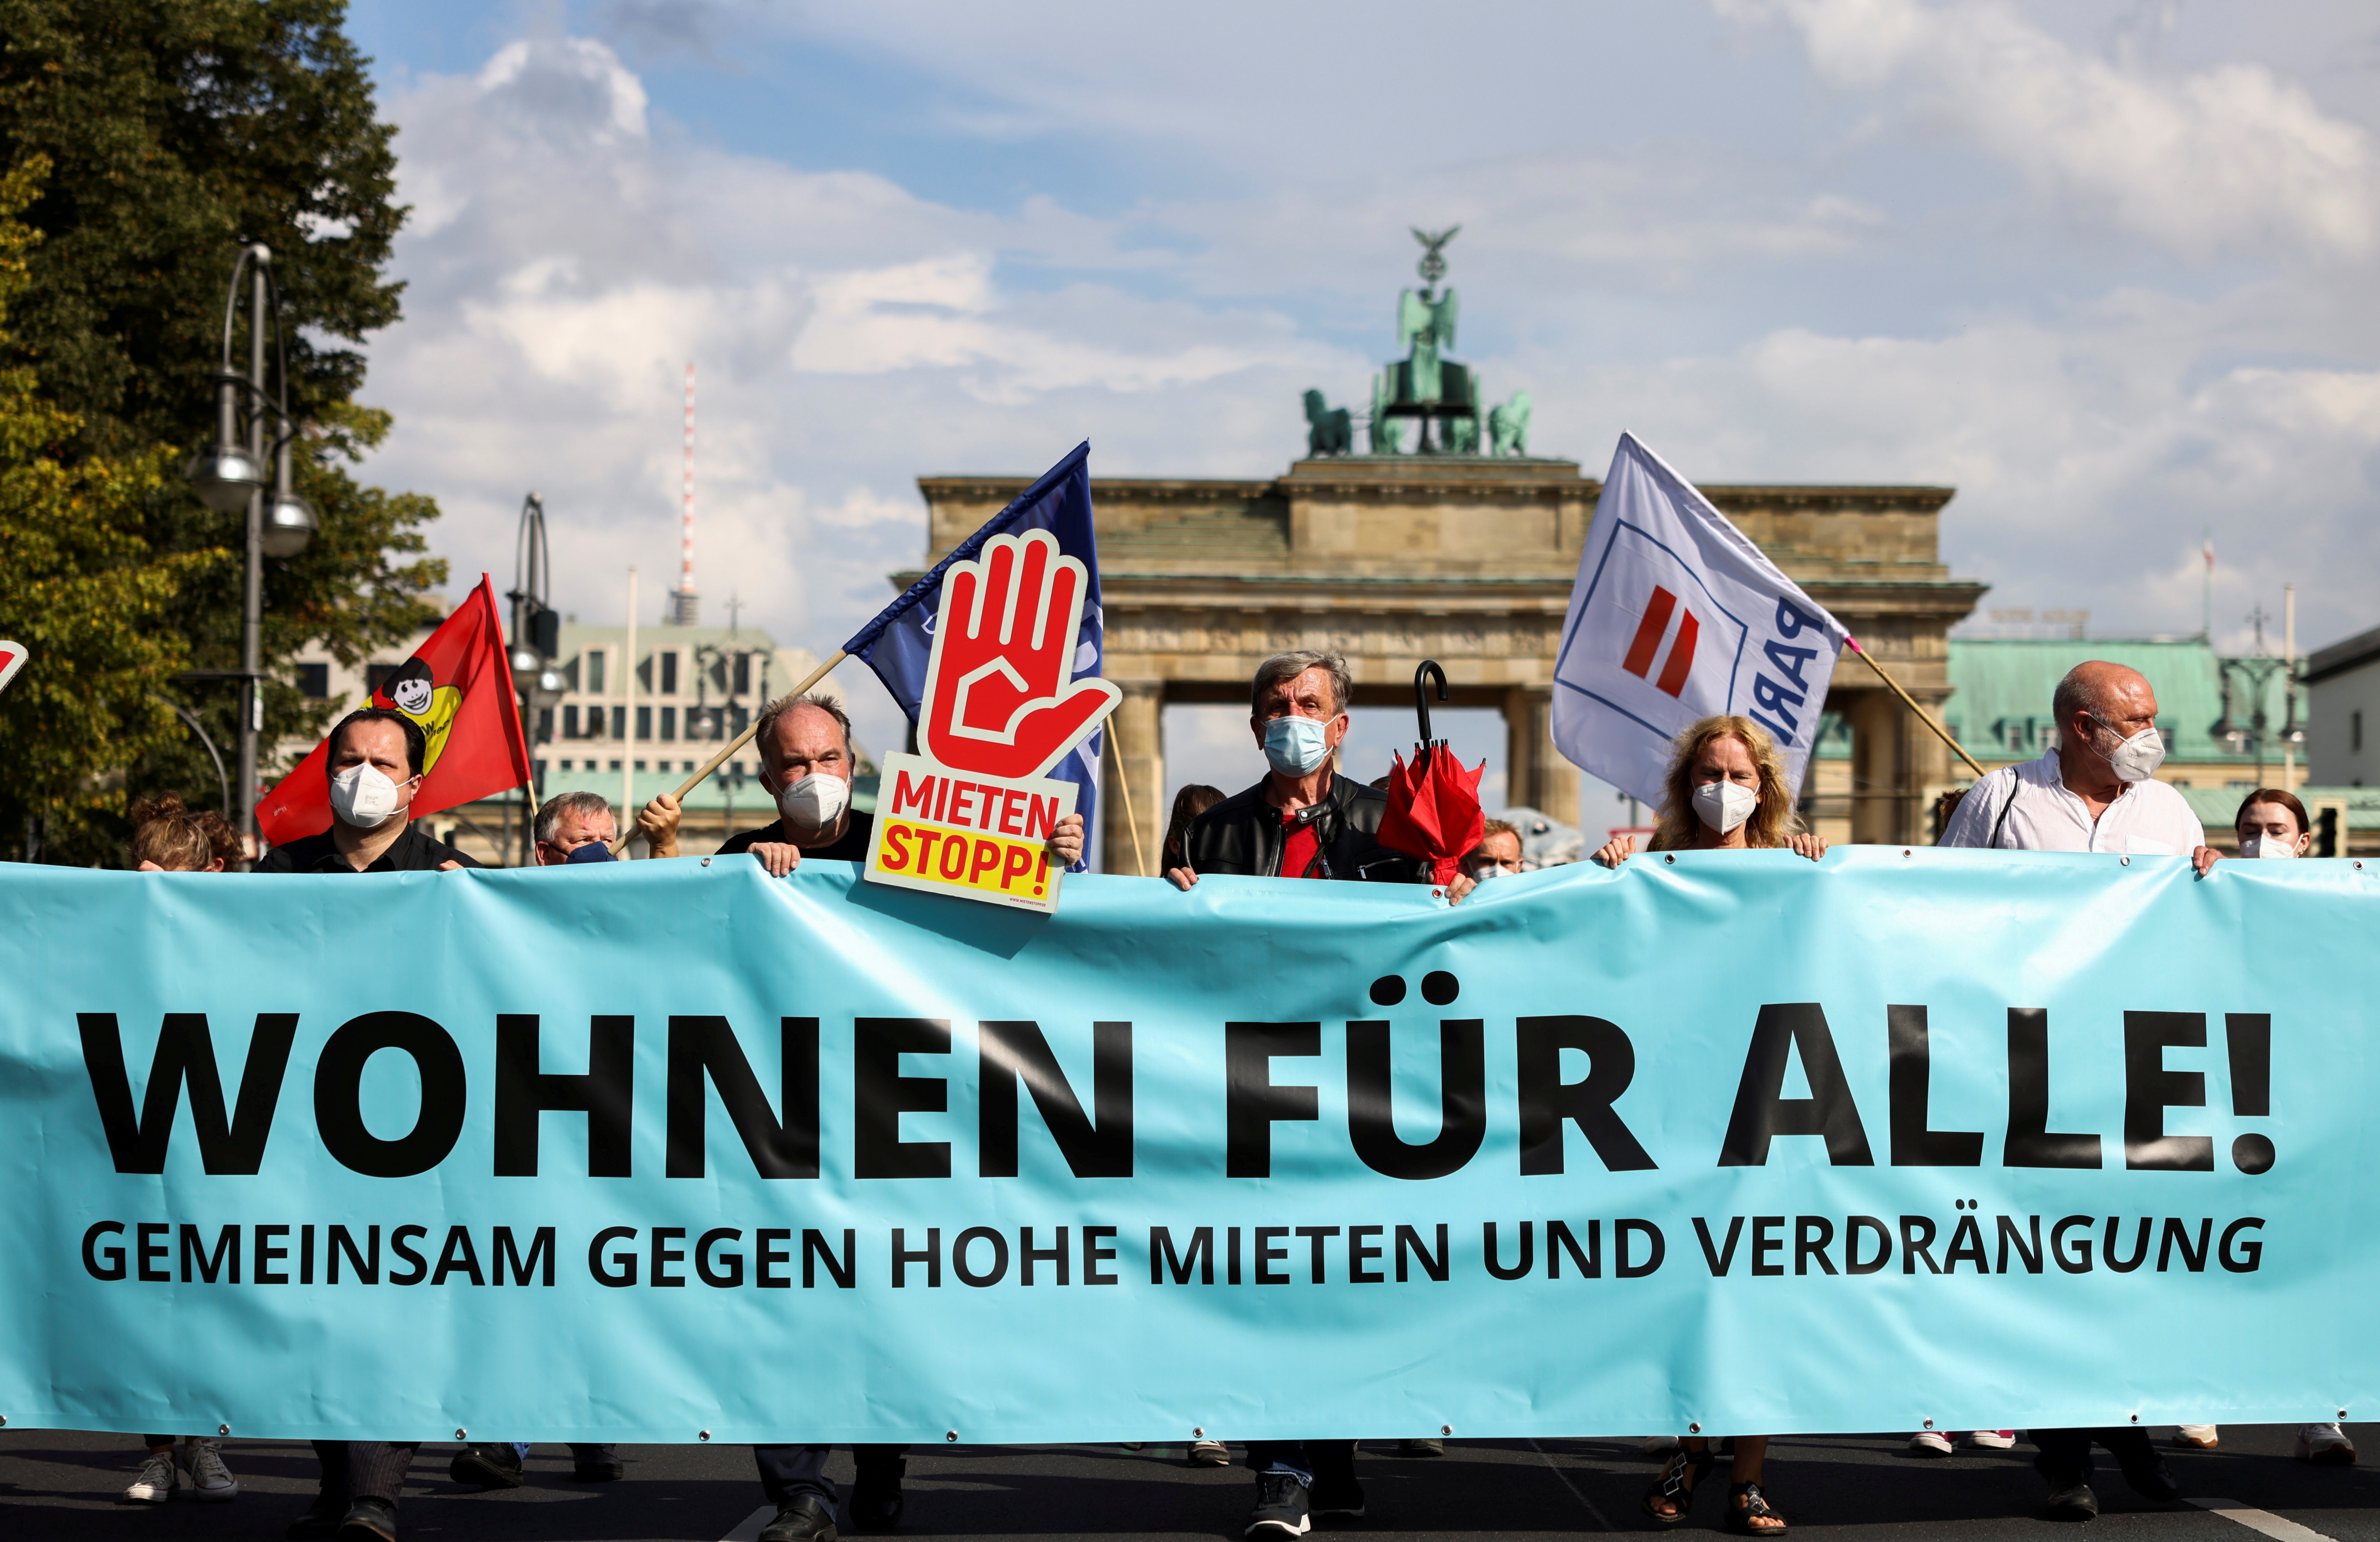 Demonstration against rising rental costs for flats in Berlin